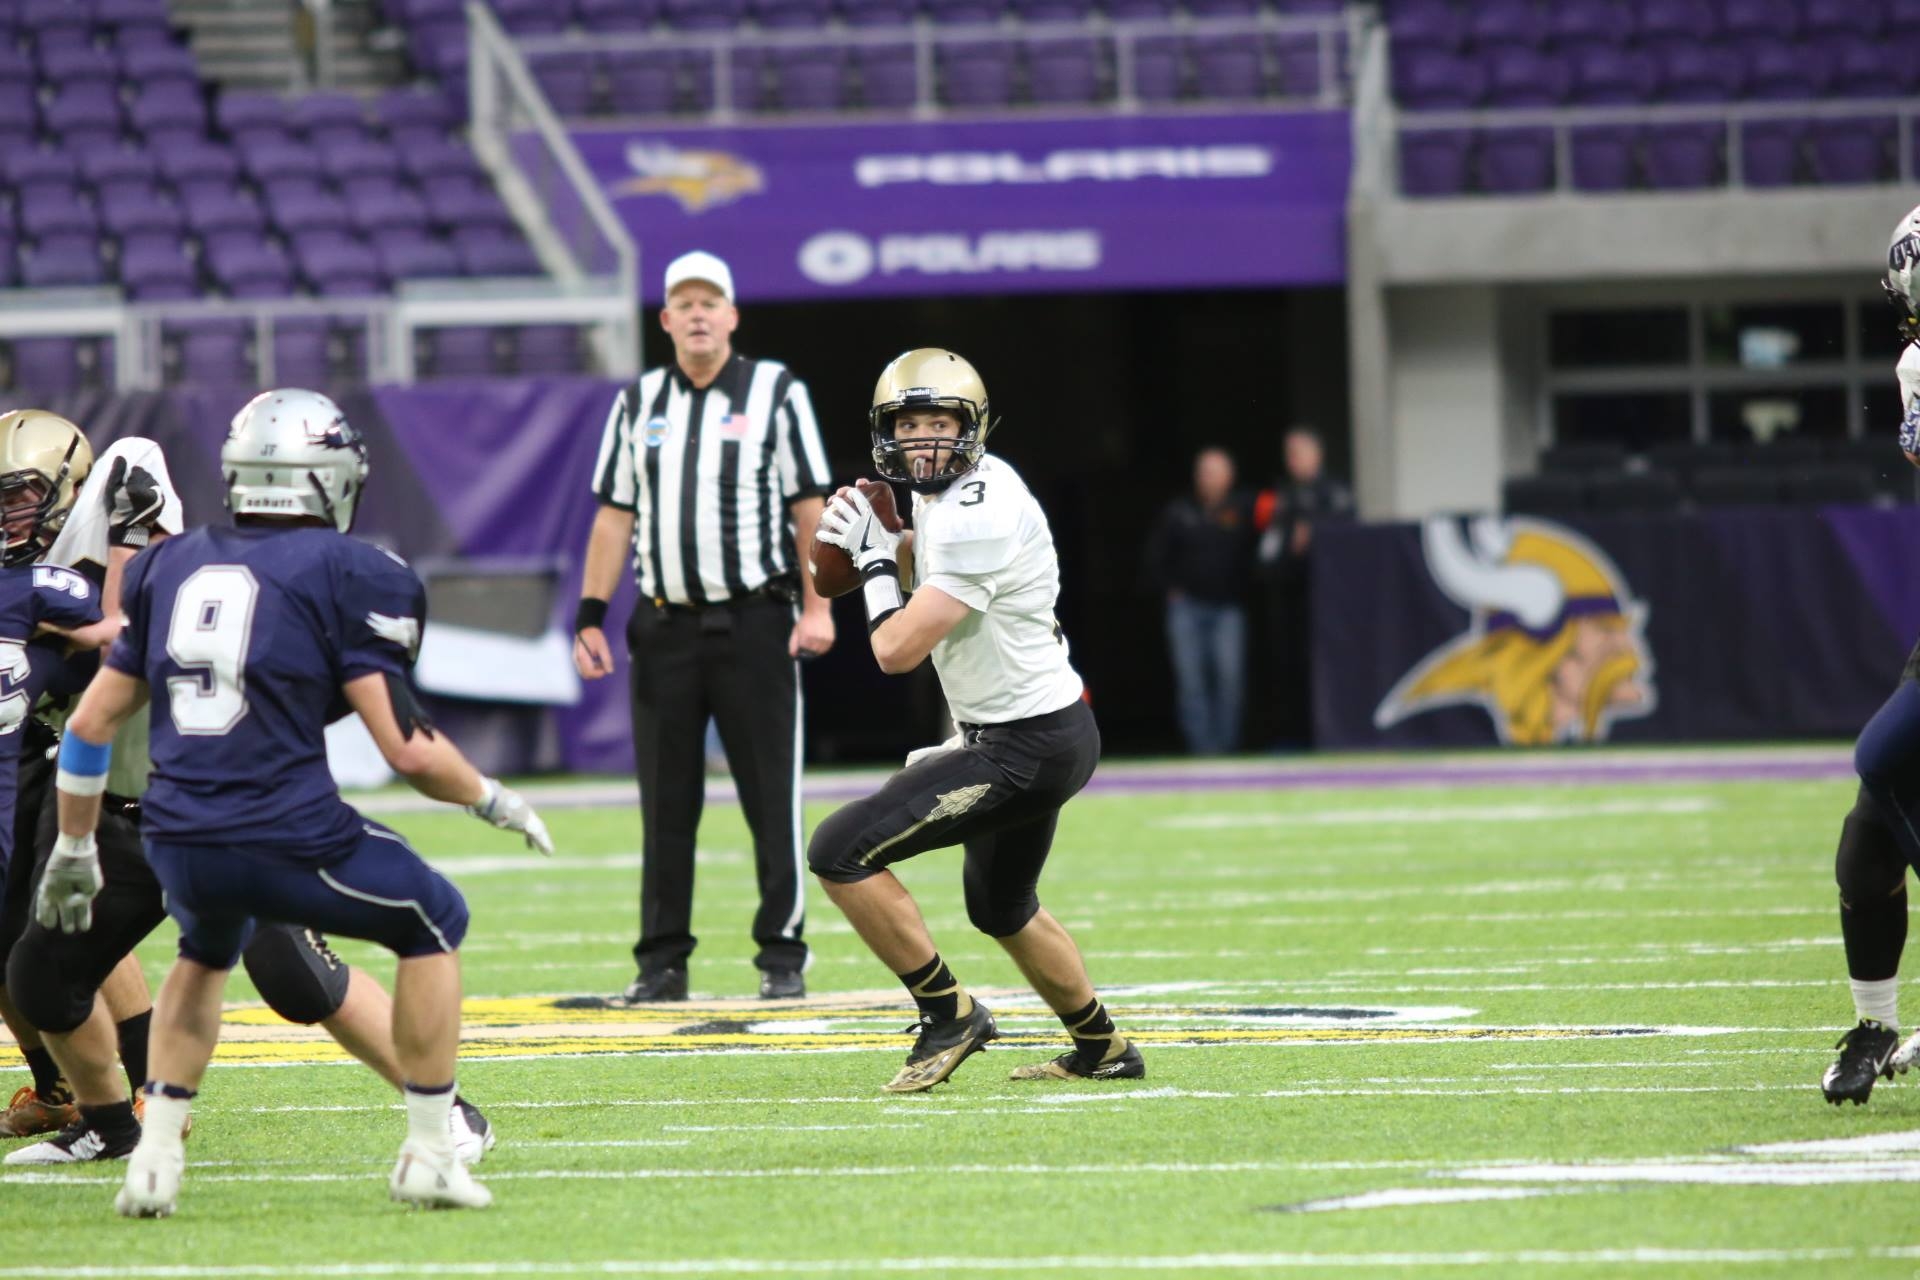 King dominates as Caledonia goes undefeated in winning back-to-back state titles